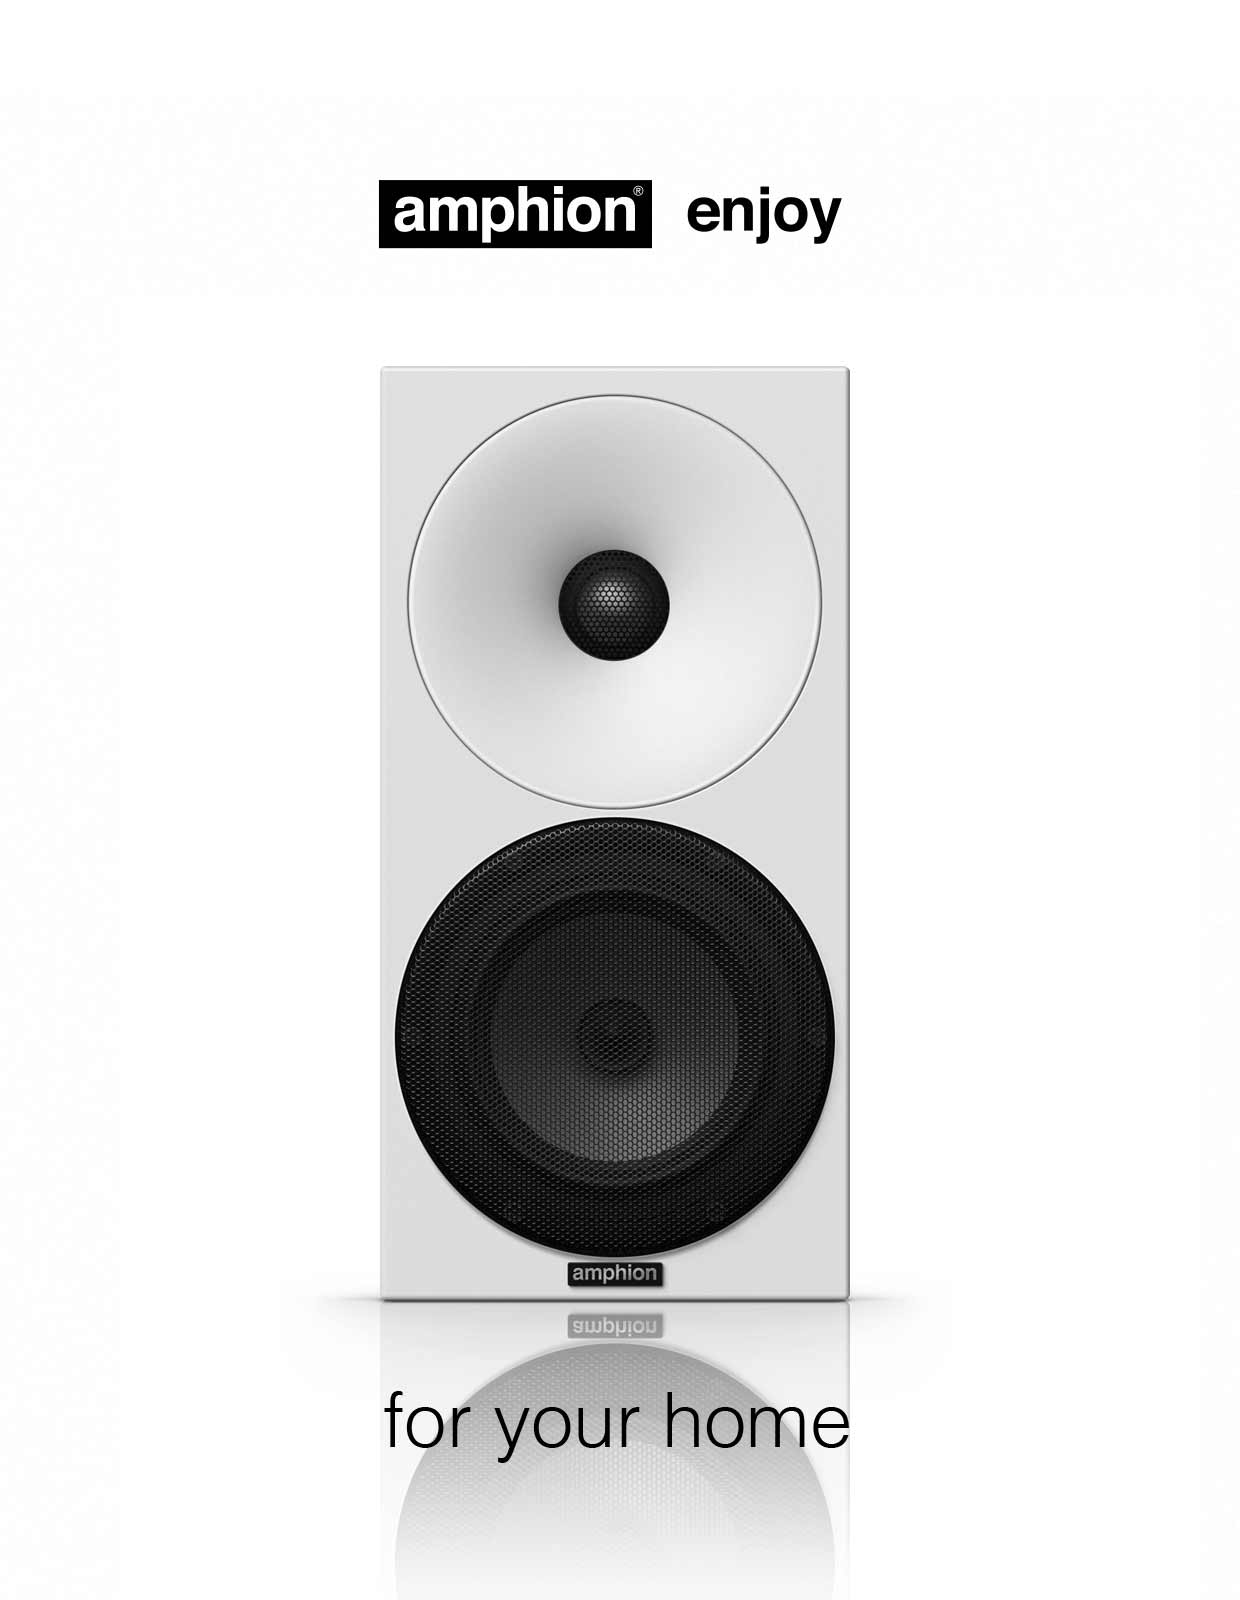 amphion-home-front-page-image_whitewithblackgrids.jpg